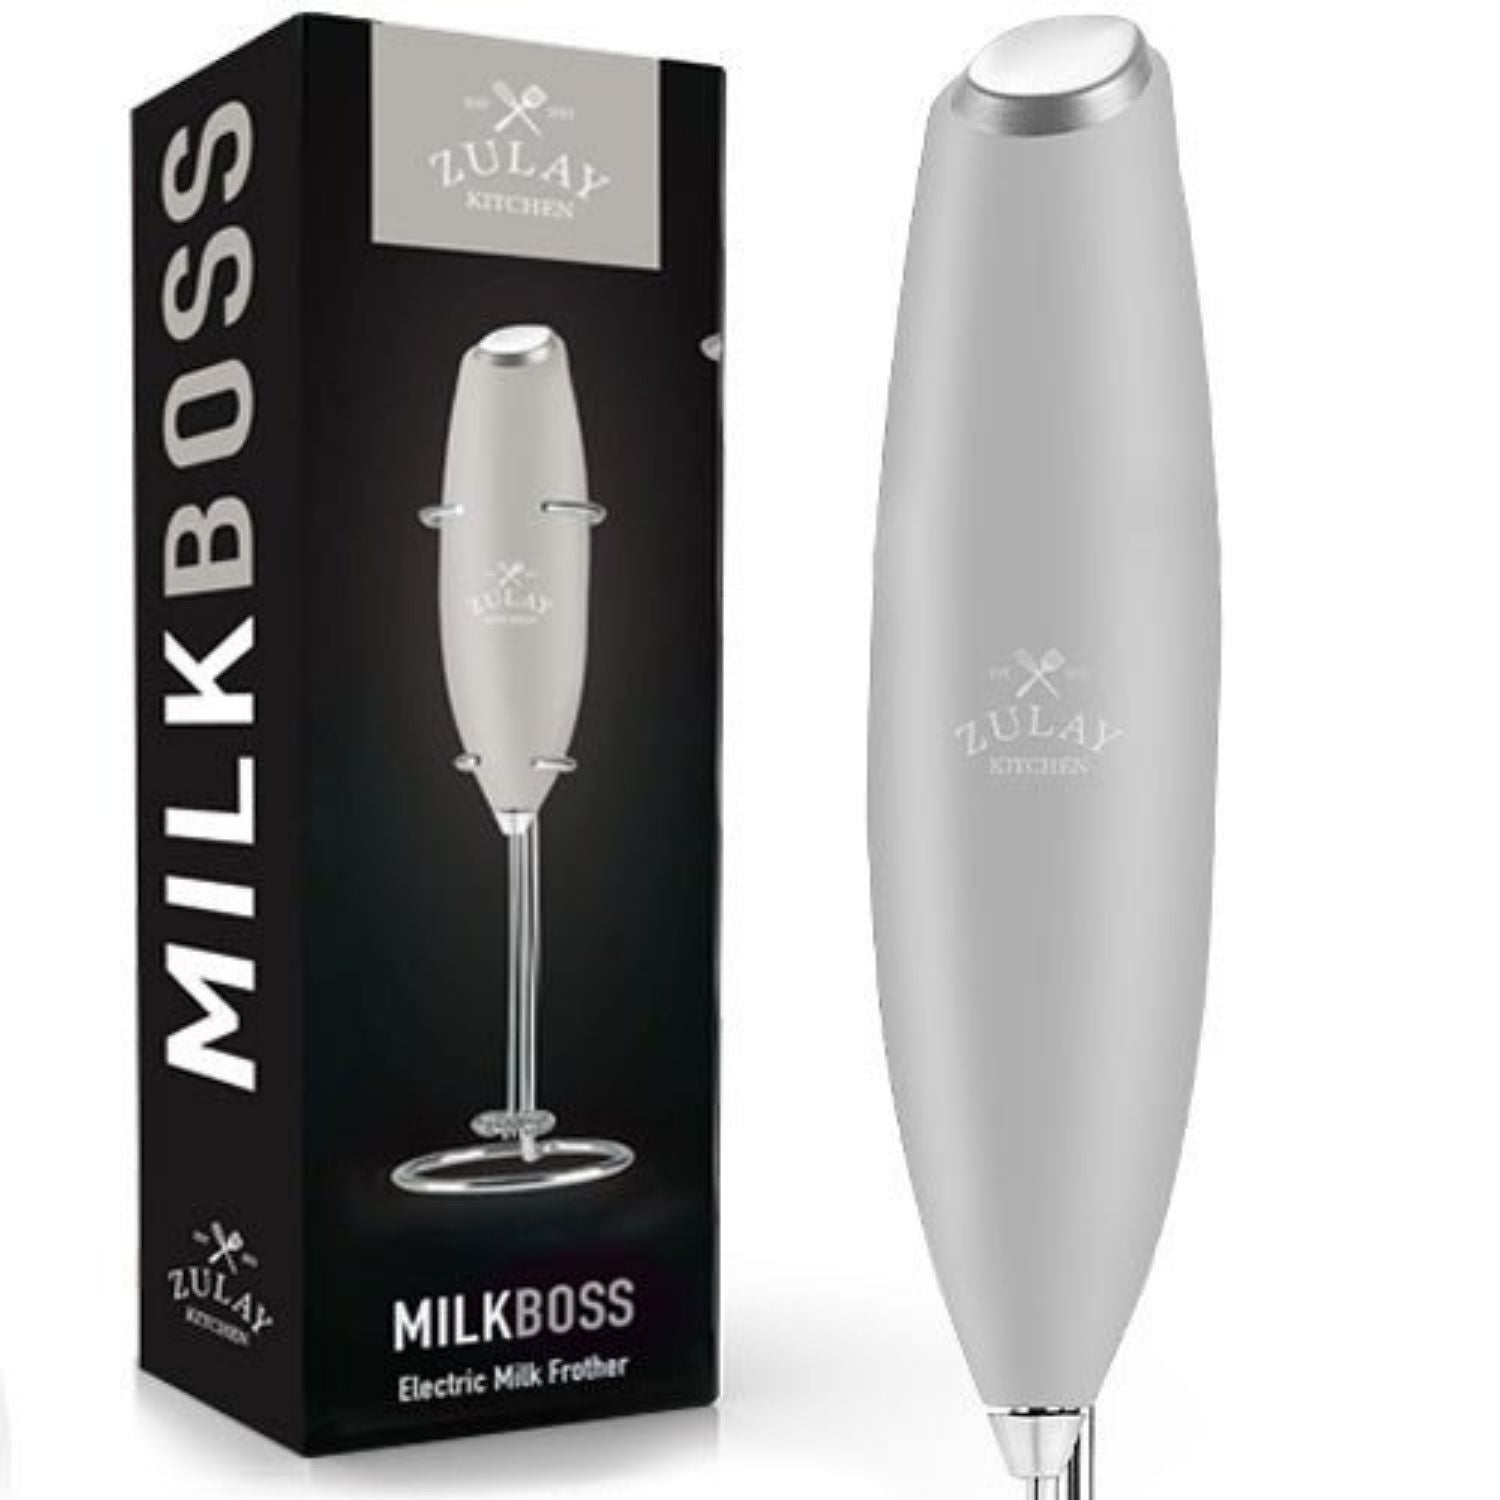 Zulay Kitchen Milk Boss Milk Frother (Without Stand) - Matte Black